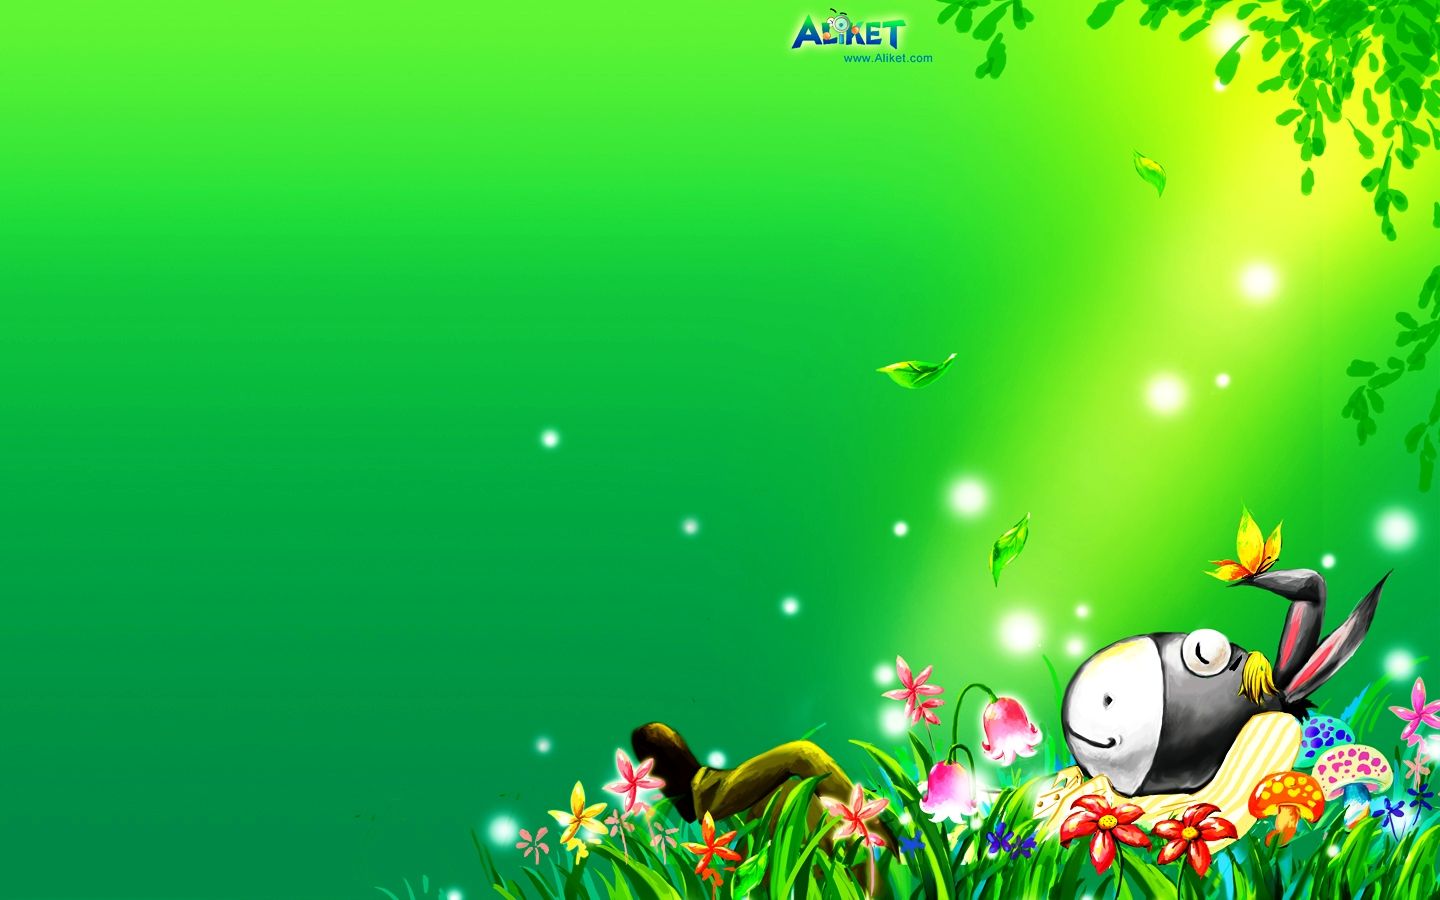 Animated Desktop Backgrounds Animated Wallpaper photos of Newest ...